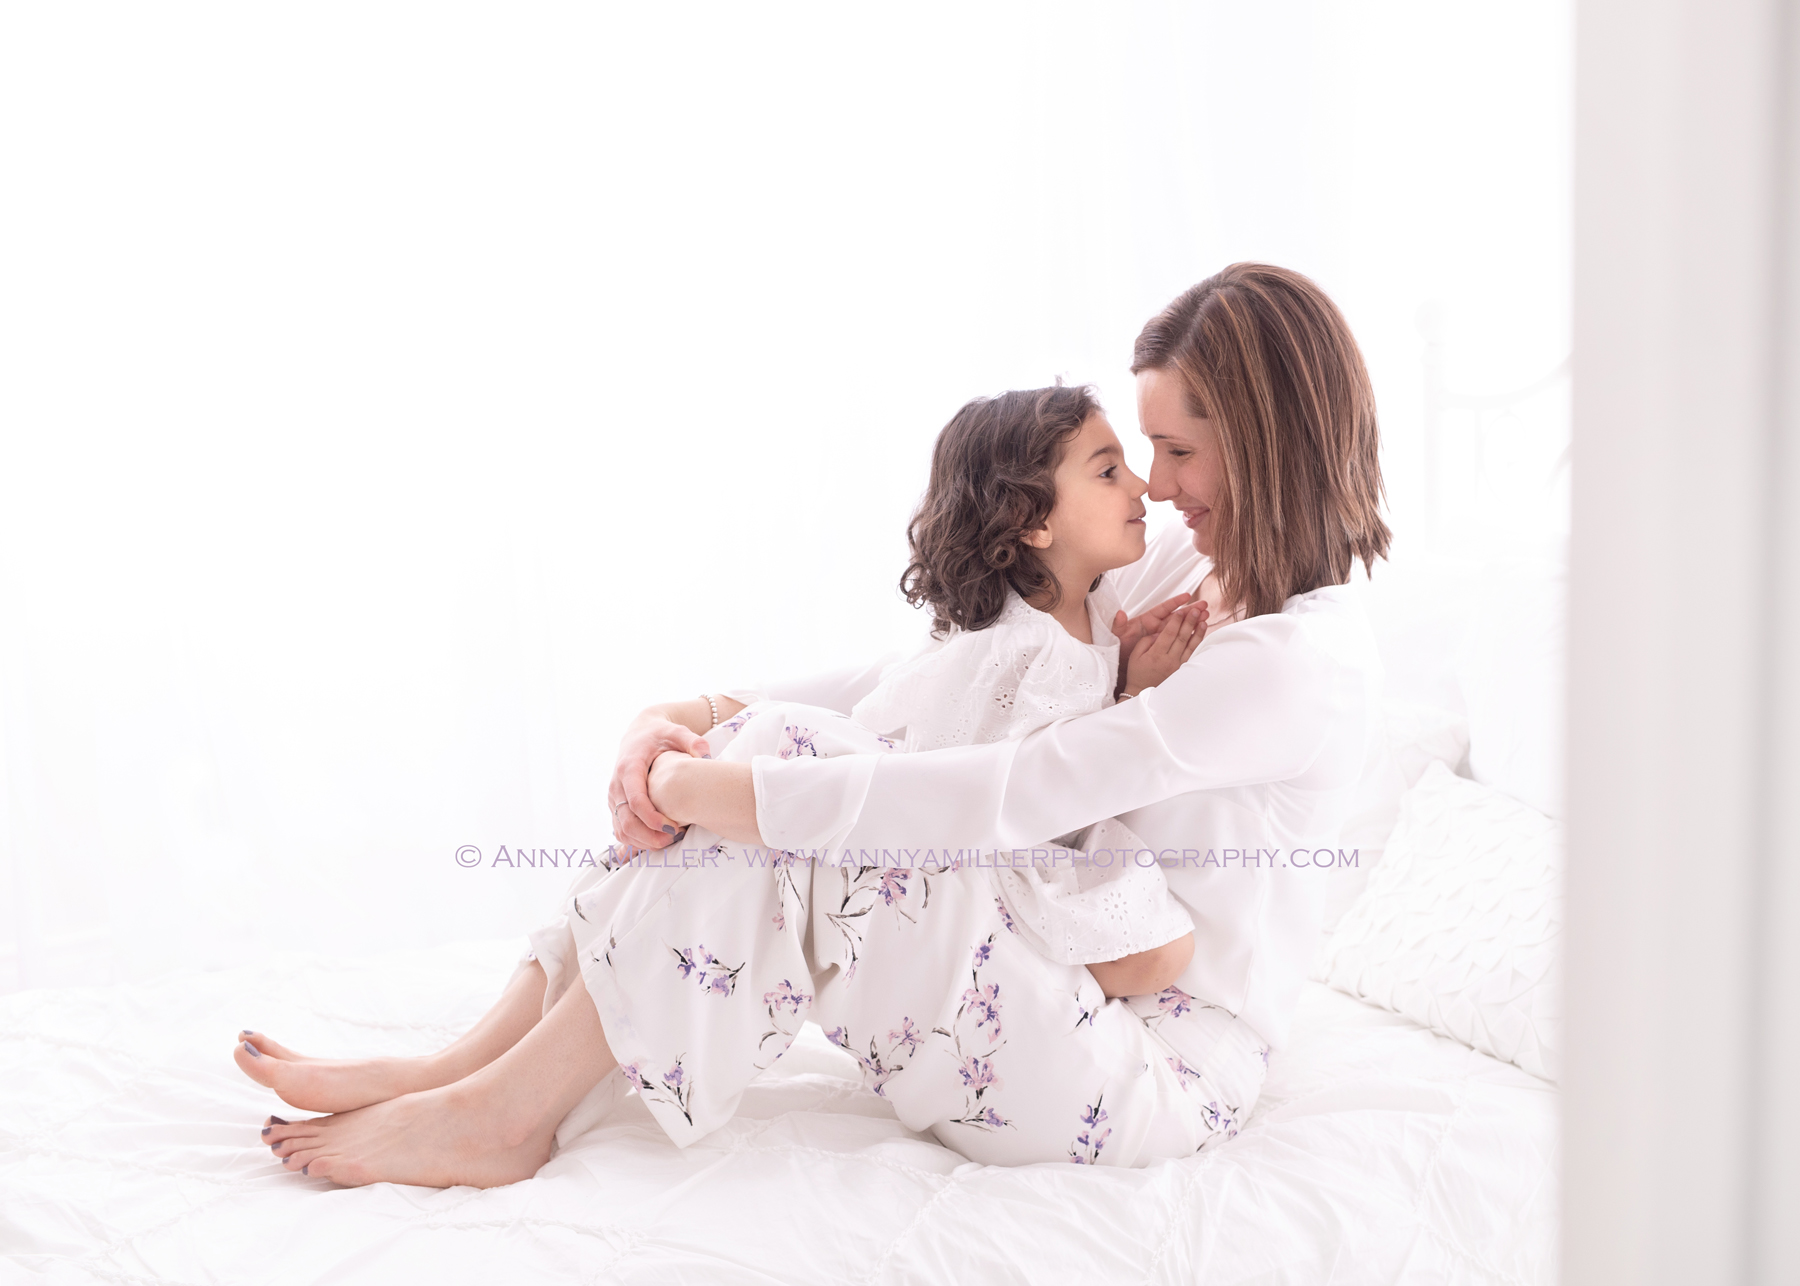 Durham region Mother's Day photography session by Annya Miller Photography in Pickering